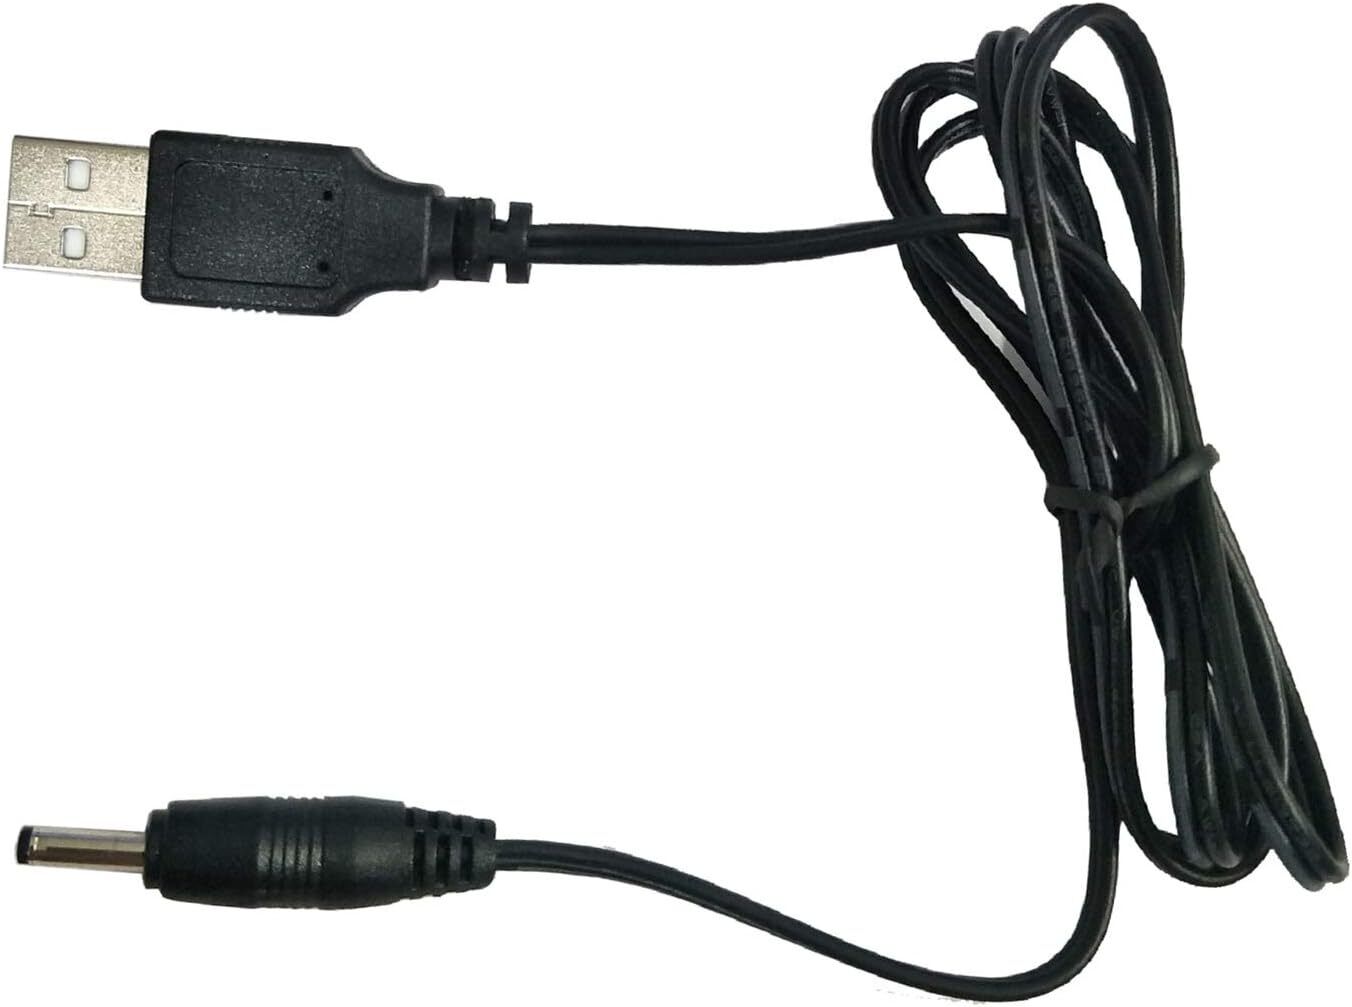 New USB PC Power Cable Charger for VANTEC LapCool 3/2 Notebook Cooler LPC-401